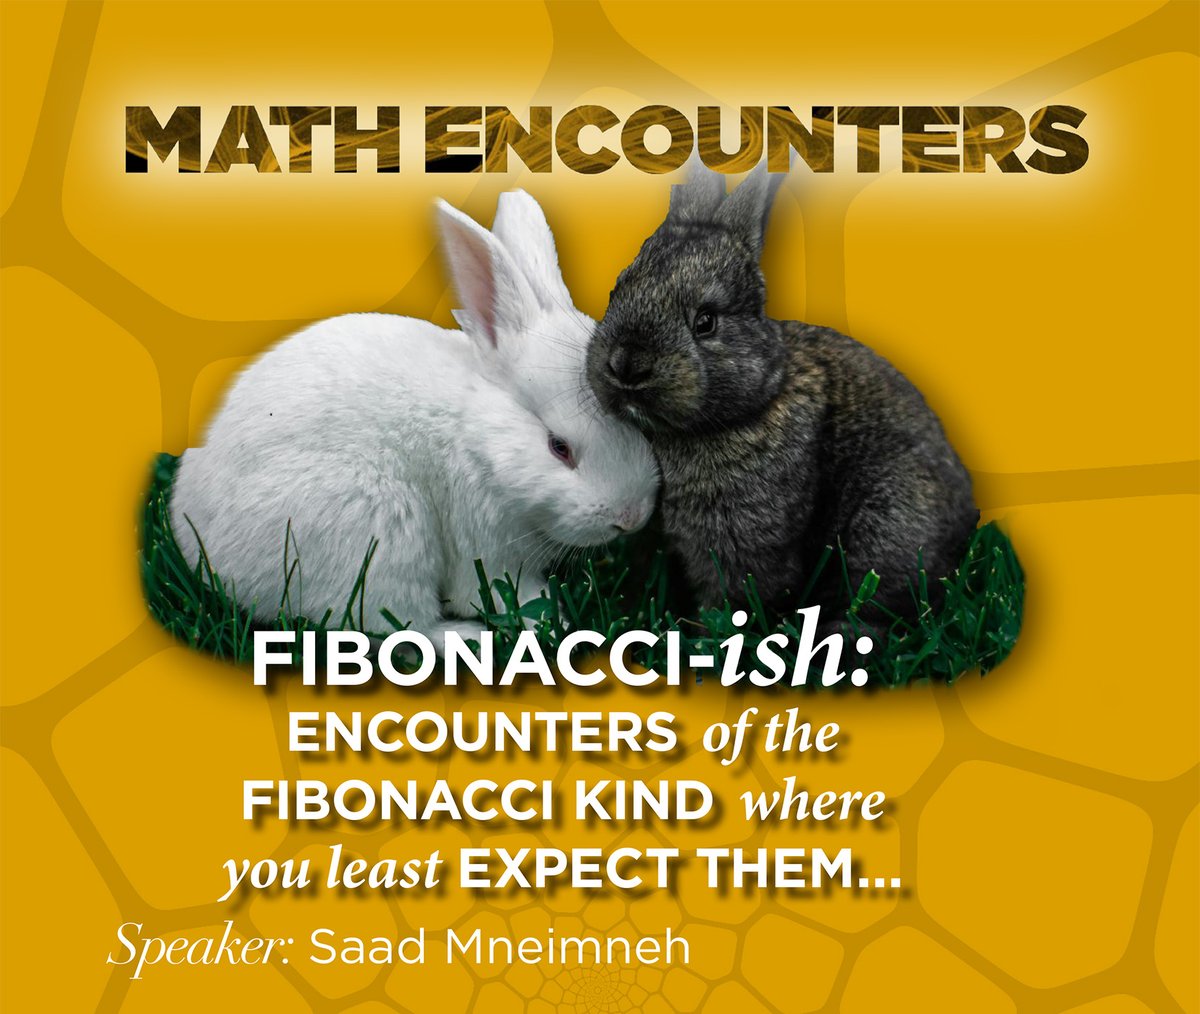 Why does Fibonacci-like behavior emerge in simple, unexpected math and computer science problems? Find out at Math Encounters, a free educational talk at MoMath on Wednesday, May 1. Attend the 4 or 7 pm session, and enjoy free refreshments. Register at momath.org/math-encounters.